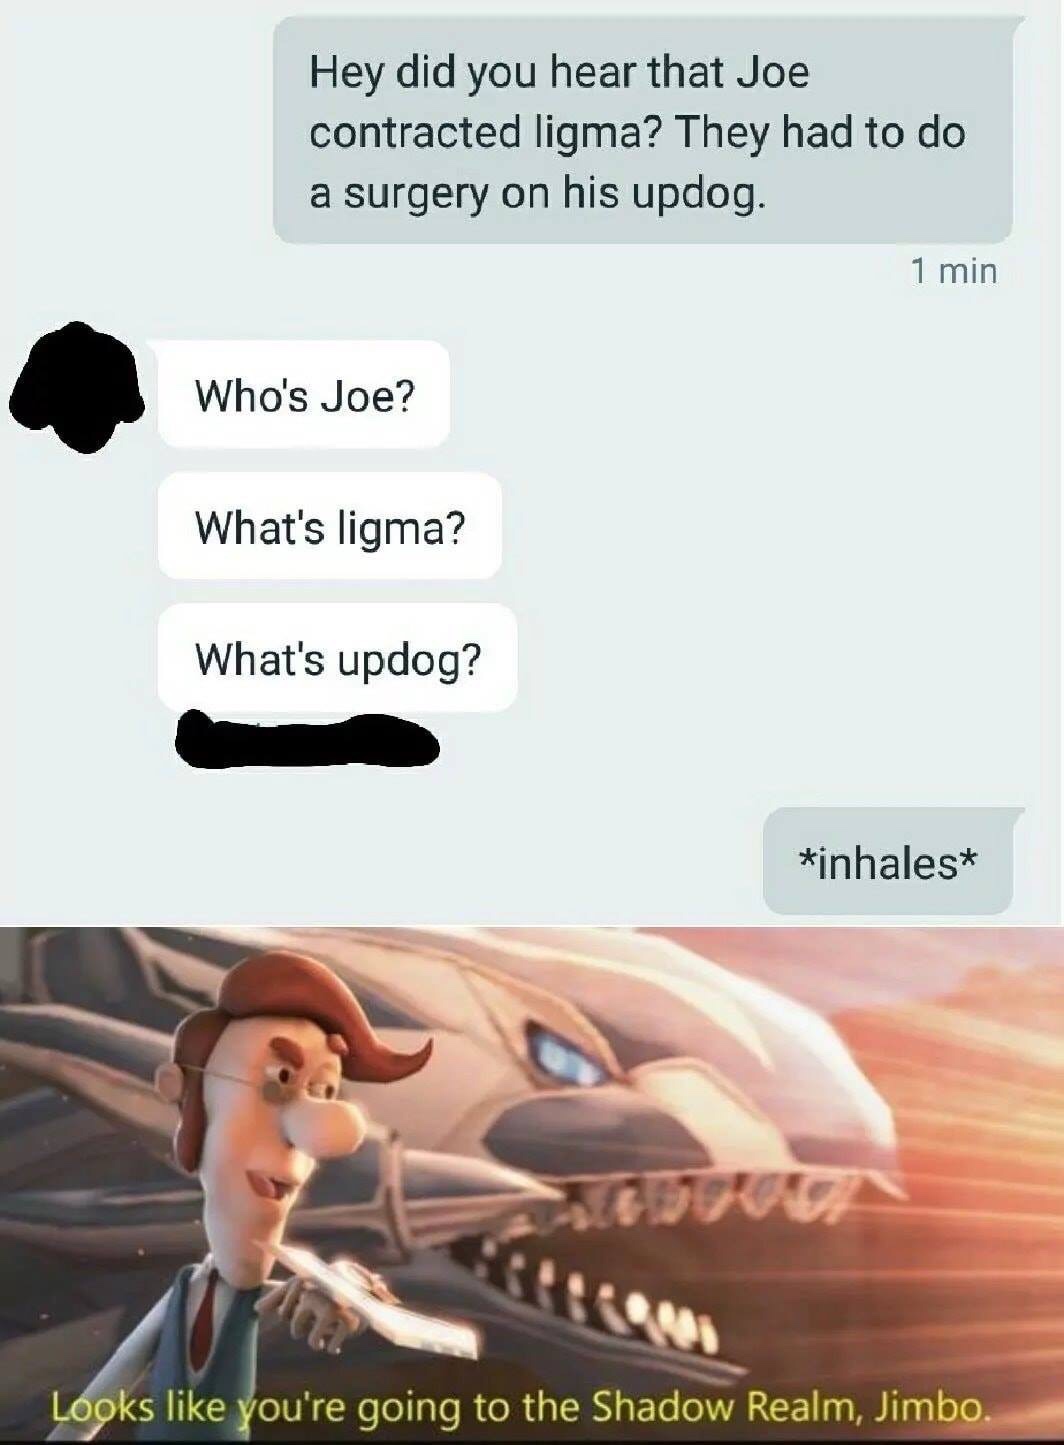 looks like you re going to the shadow realm jimbo - Hey did you hear that Joe contracted ligma? They had to do a surgery on his updog. 1 min Who's Joe? What's ligma? What's updog? inhales Looks you're going to the Shadow Realm, Jimbo.